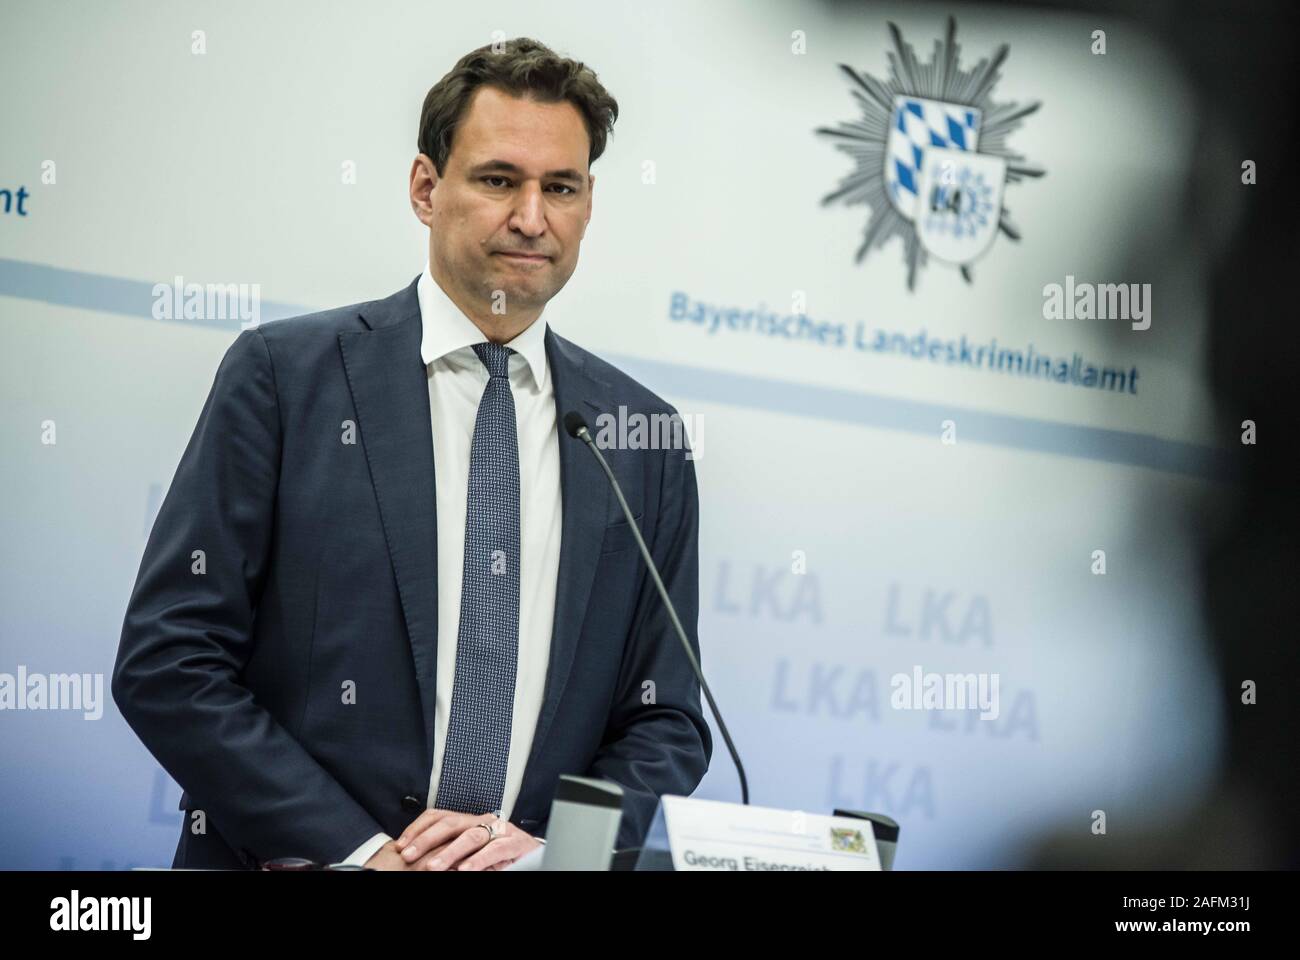 Munich, Bavaria, Germany. 16th Dec, 2019. GEORG EISEINREICH, Justice Minister of Bavaria. Bavarian Interior Minister Joachim Herrmann, Justice Minister George Eisenreich, Bavarian Landeskriminalamt (Crime Office) preisdent Robert Heimberger, and Bavarian Attorney General Reinhard RÃ¶ttle (Reinhard Roettle) presented the results of the war on organized crime in Bavaria, In 2018 alone, the damages to the state totaled some 169 million Euros, a staggering increase from 2017's figure of 12 million. Processes against organized crime have cost the state some 76 million Euros. In addition to Stock Photo